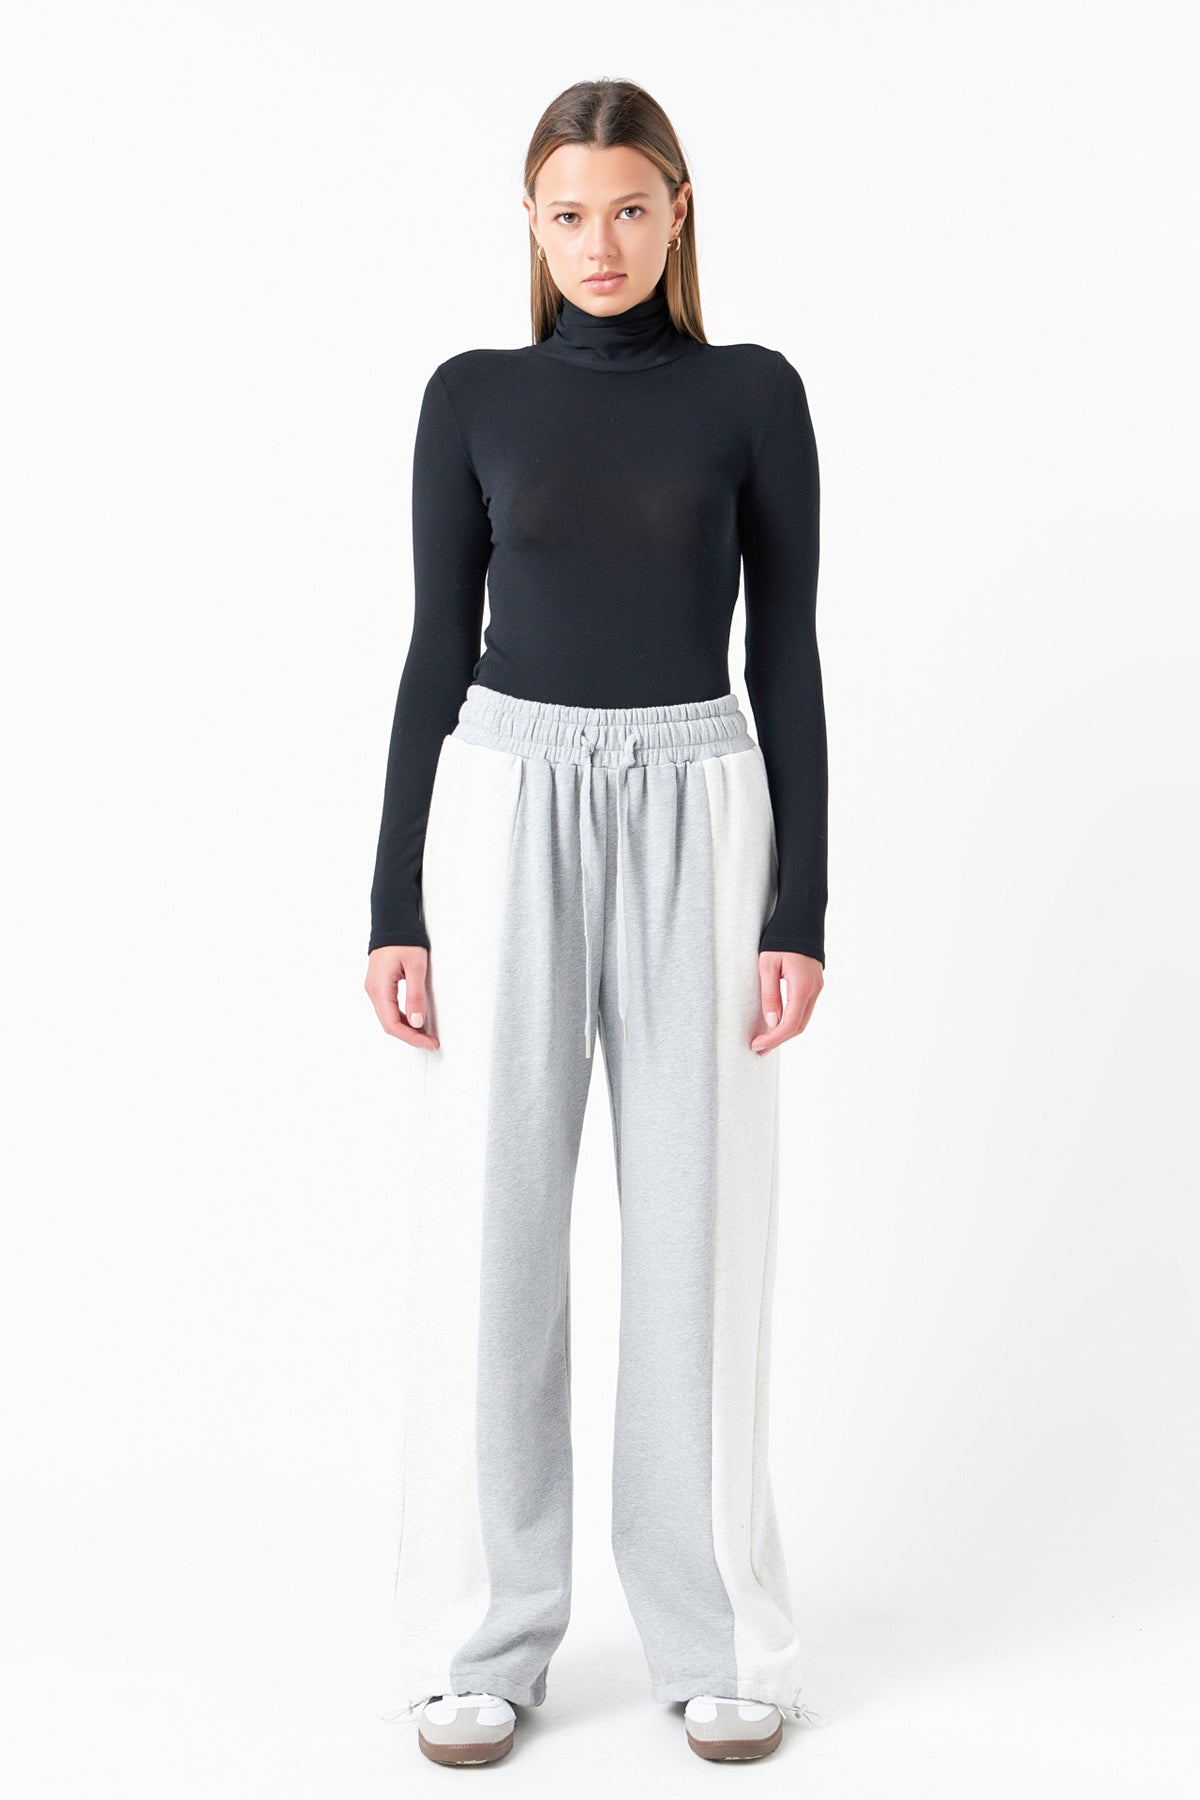 GREY LAB - Colorblock Loungewear Pants - PANTS available at Objectrare